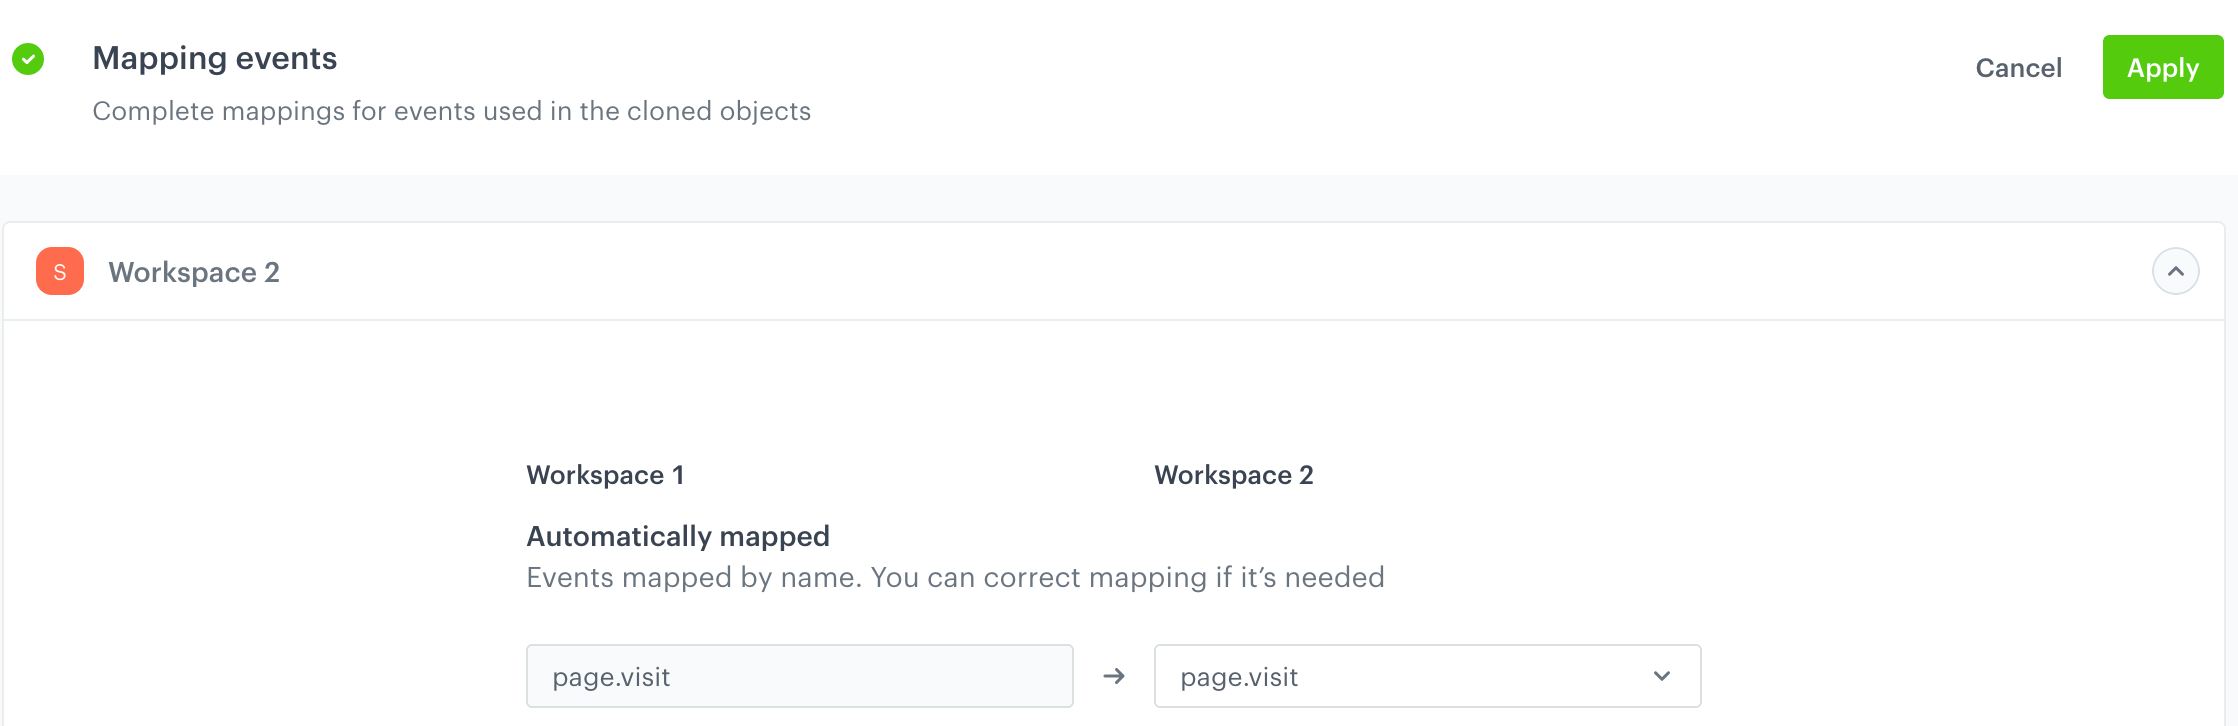 Mapping events compatible in the source and target workspaces